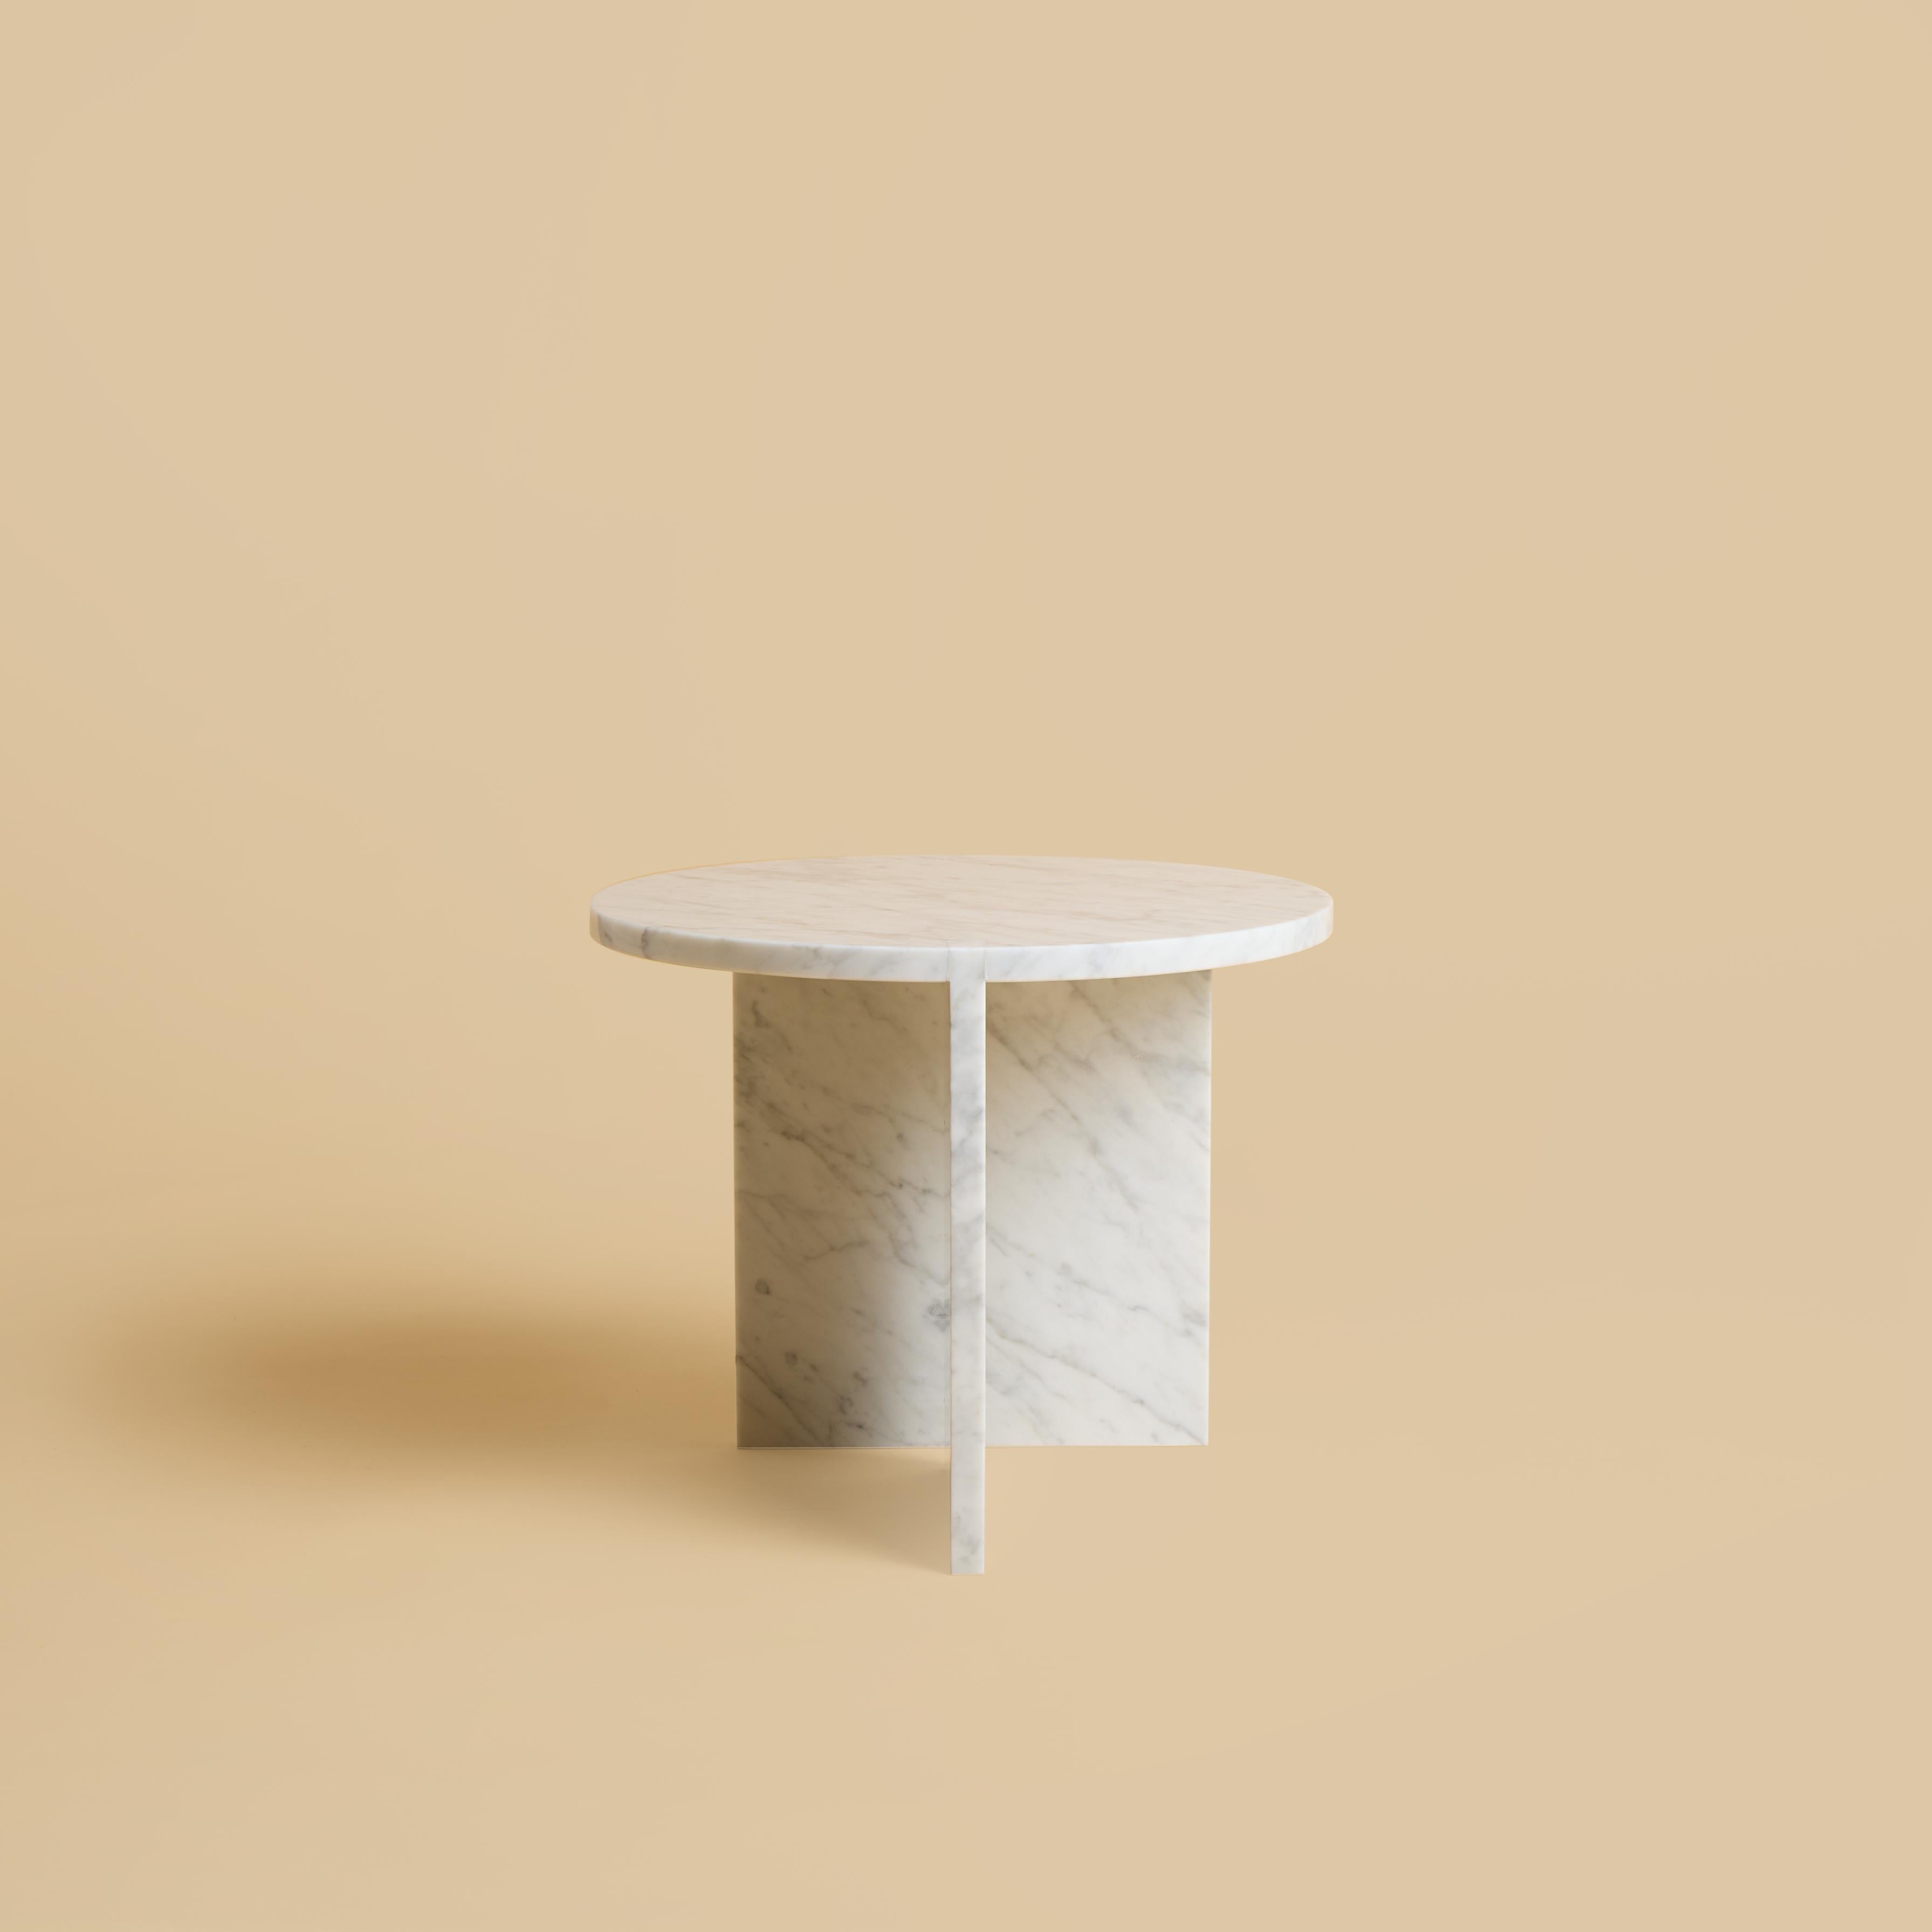 Italian Carrara Marble Circular Side Table, Made in Italy For Sale